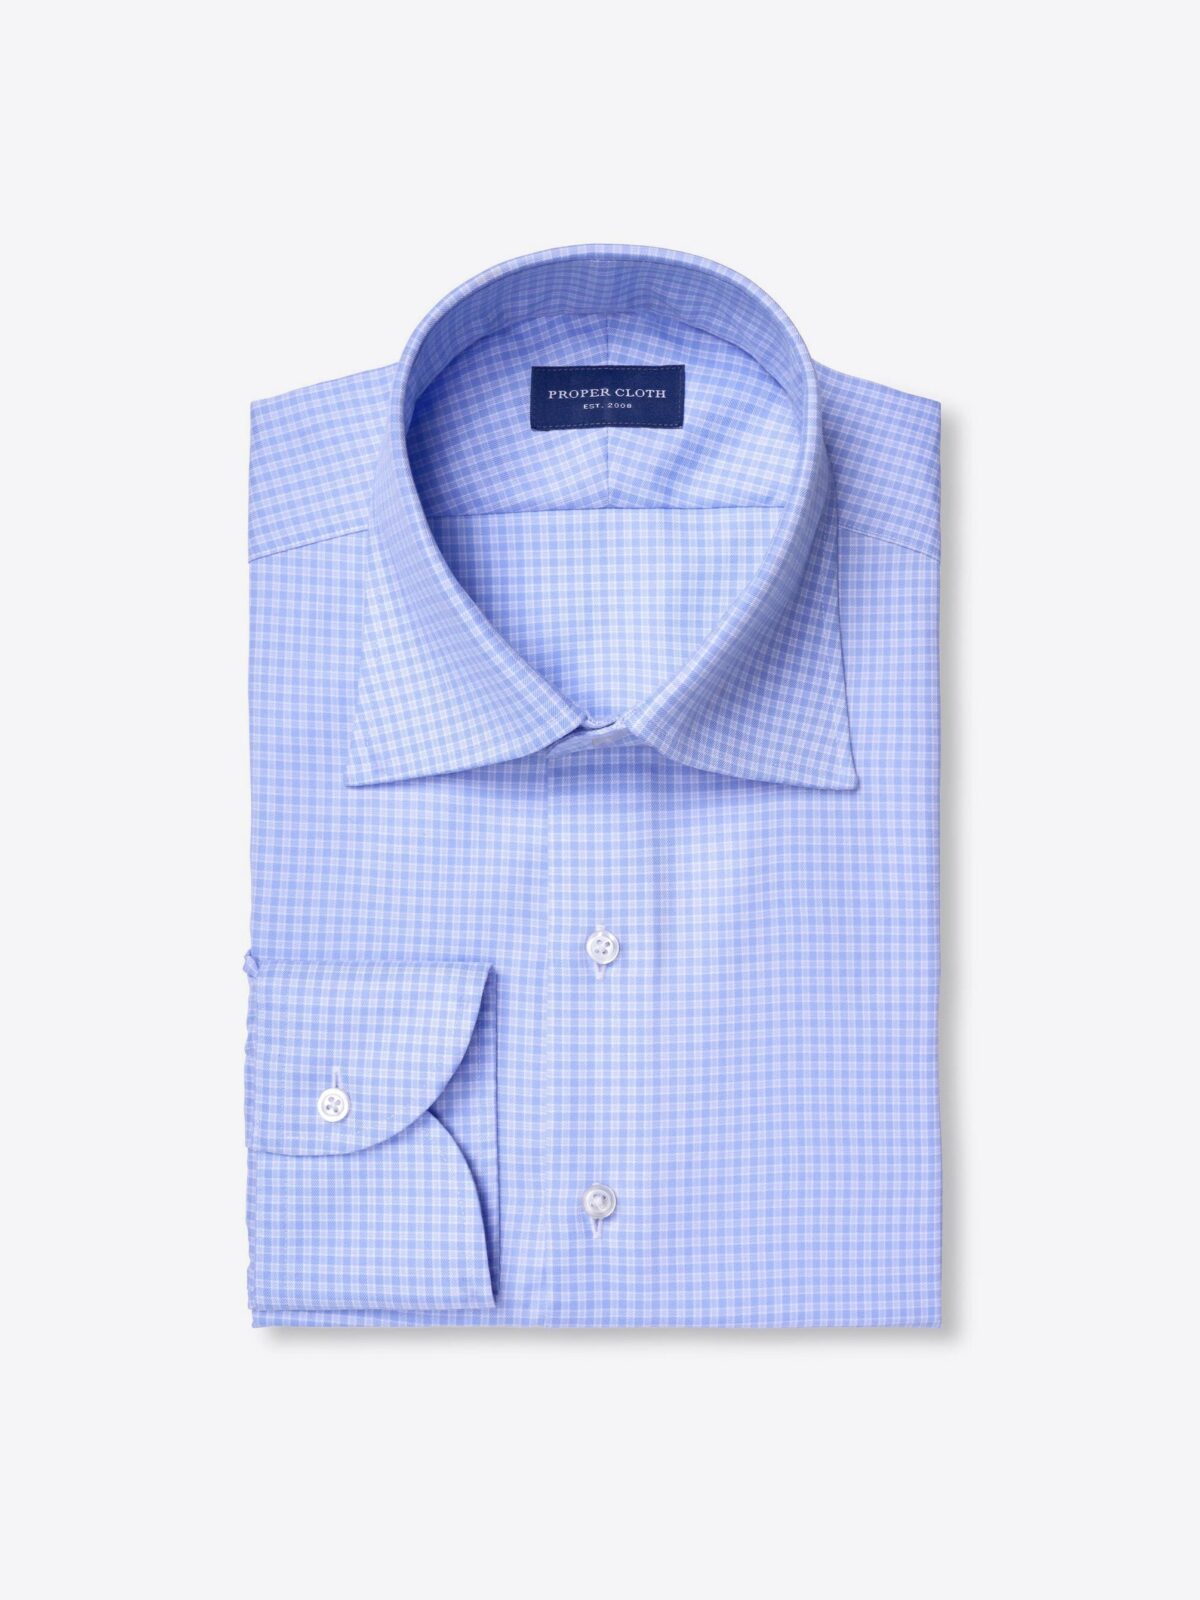 Mayfair Wrinkle-Resistant Blue Micro Check Shirt by Proper Cloth